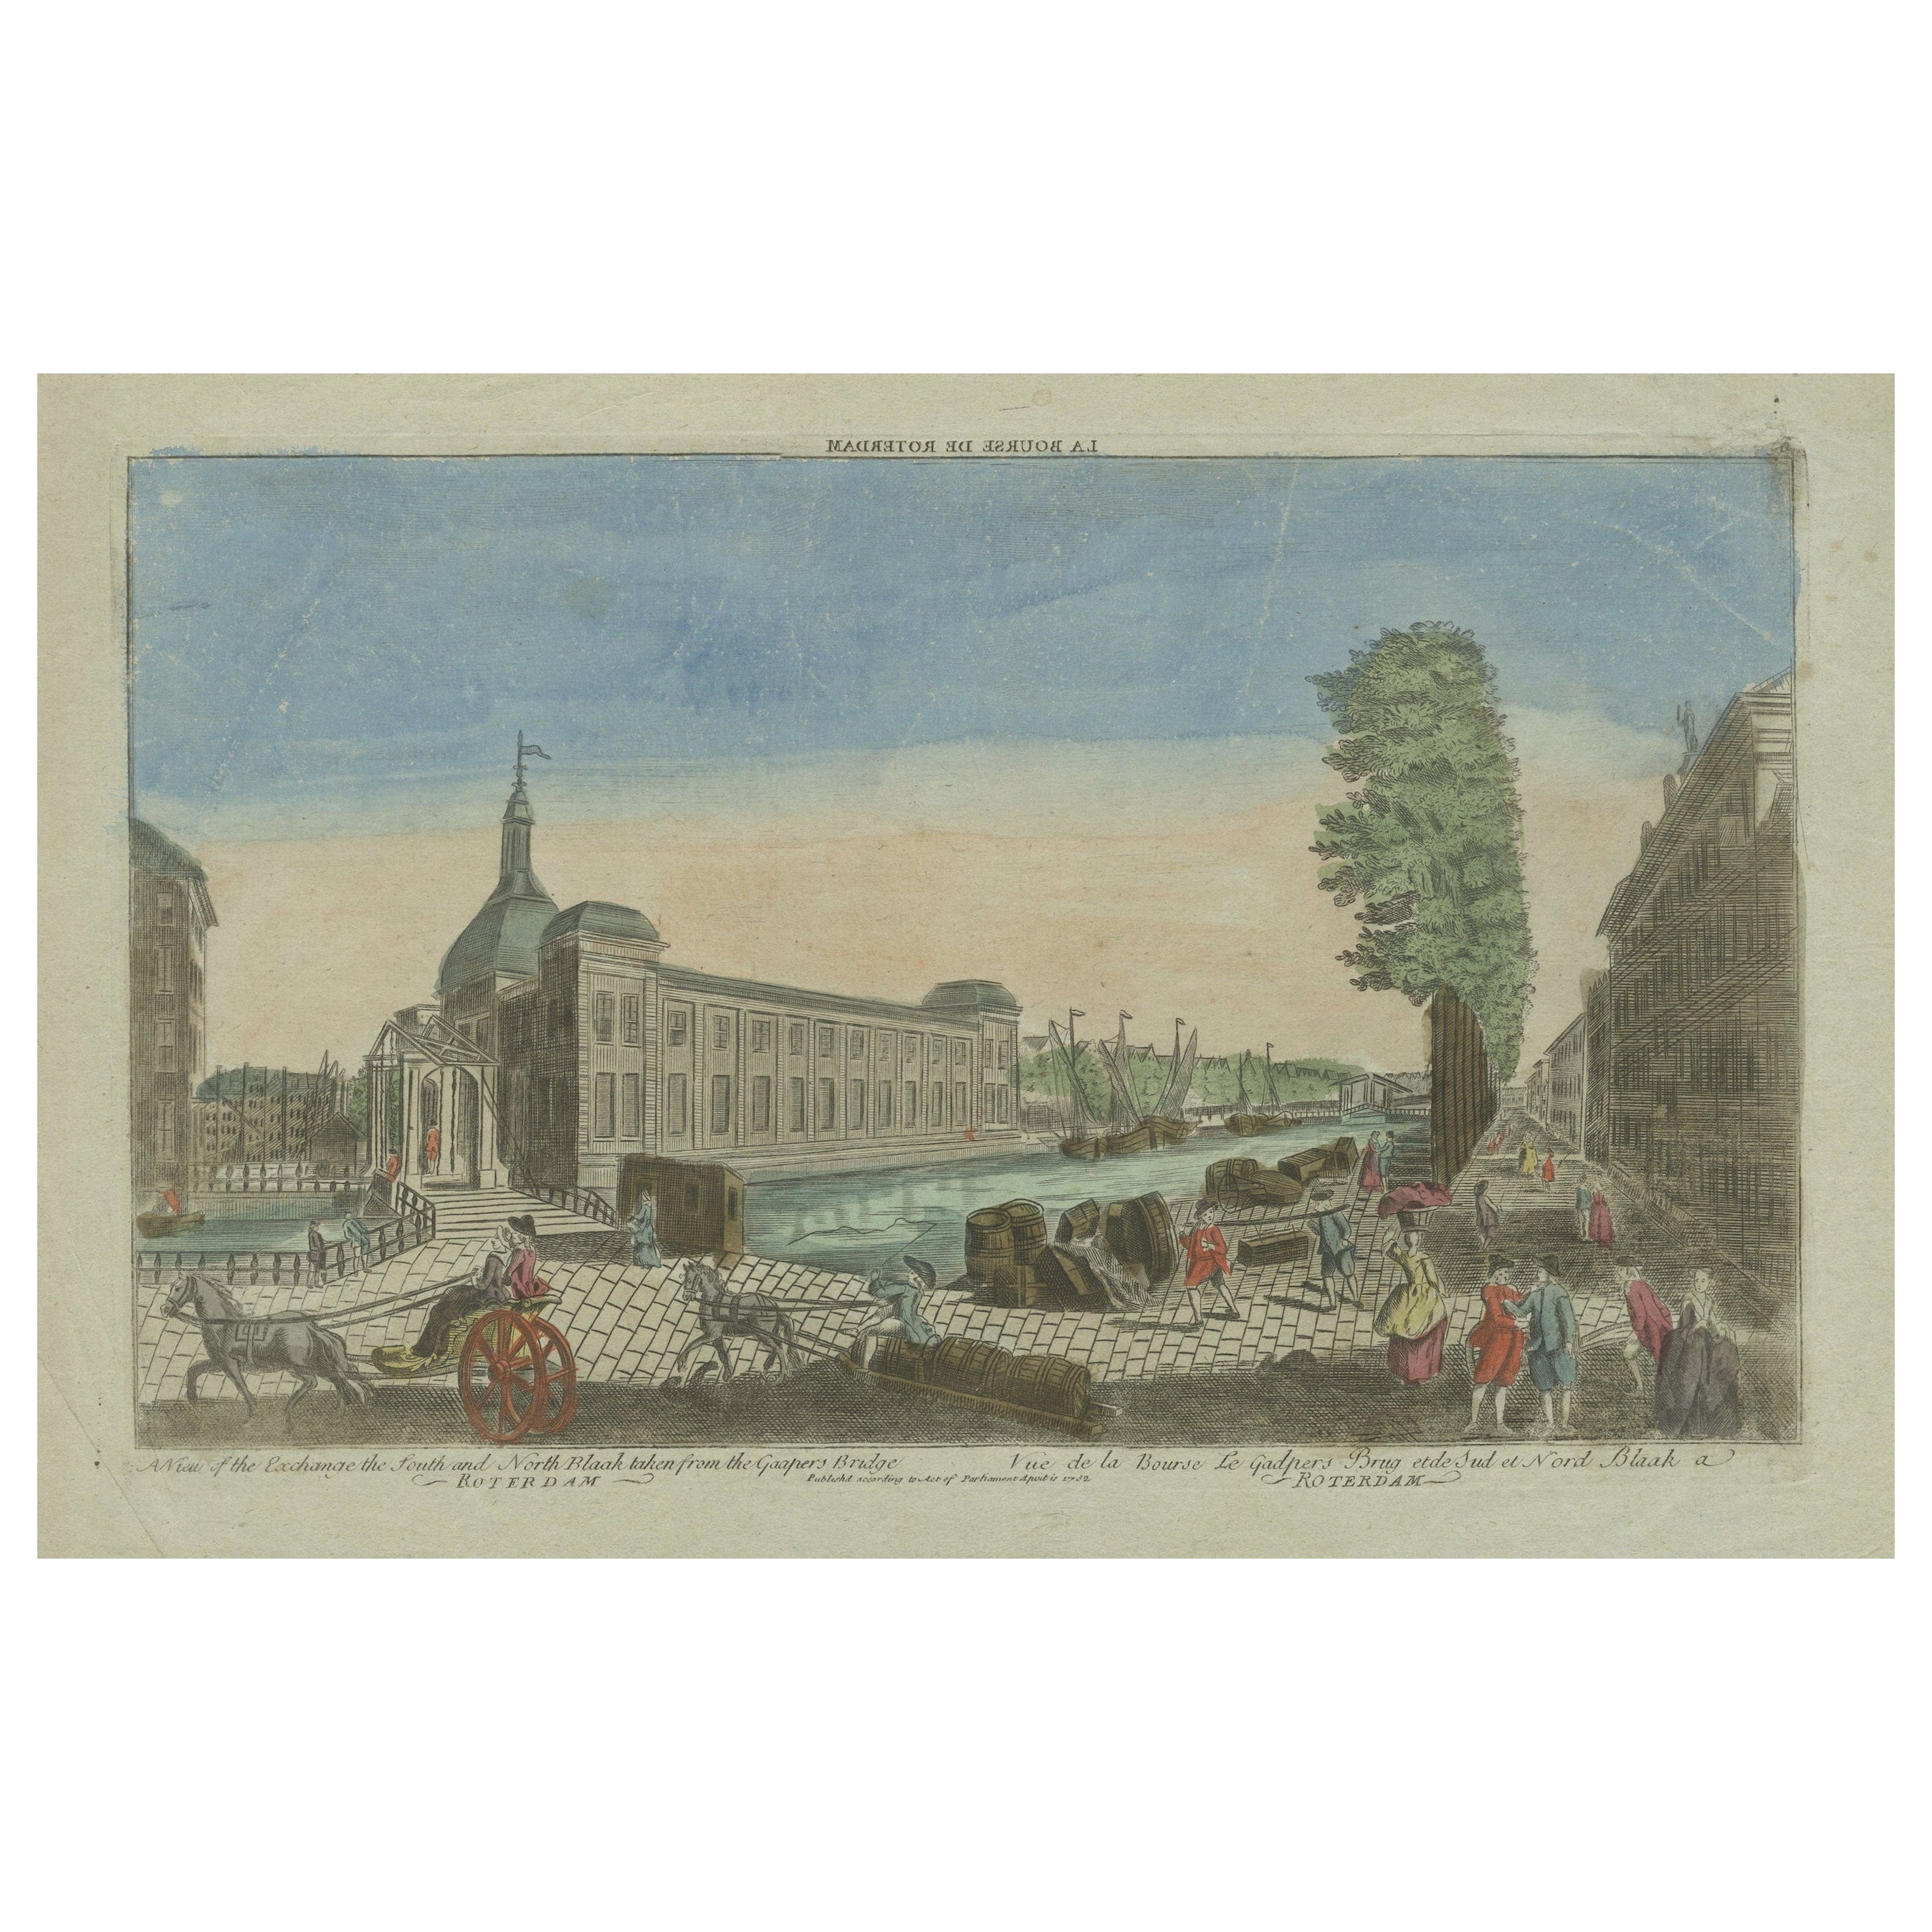 Rare Old Hand-Colored Optica Print of the Blaak in Rotterdam, the Netherlands